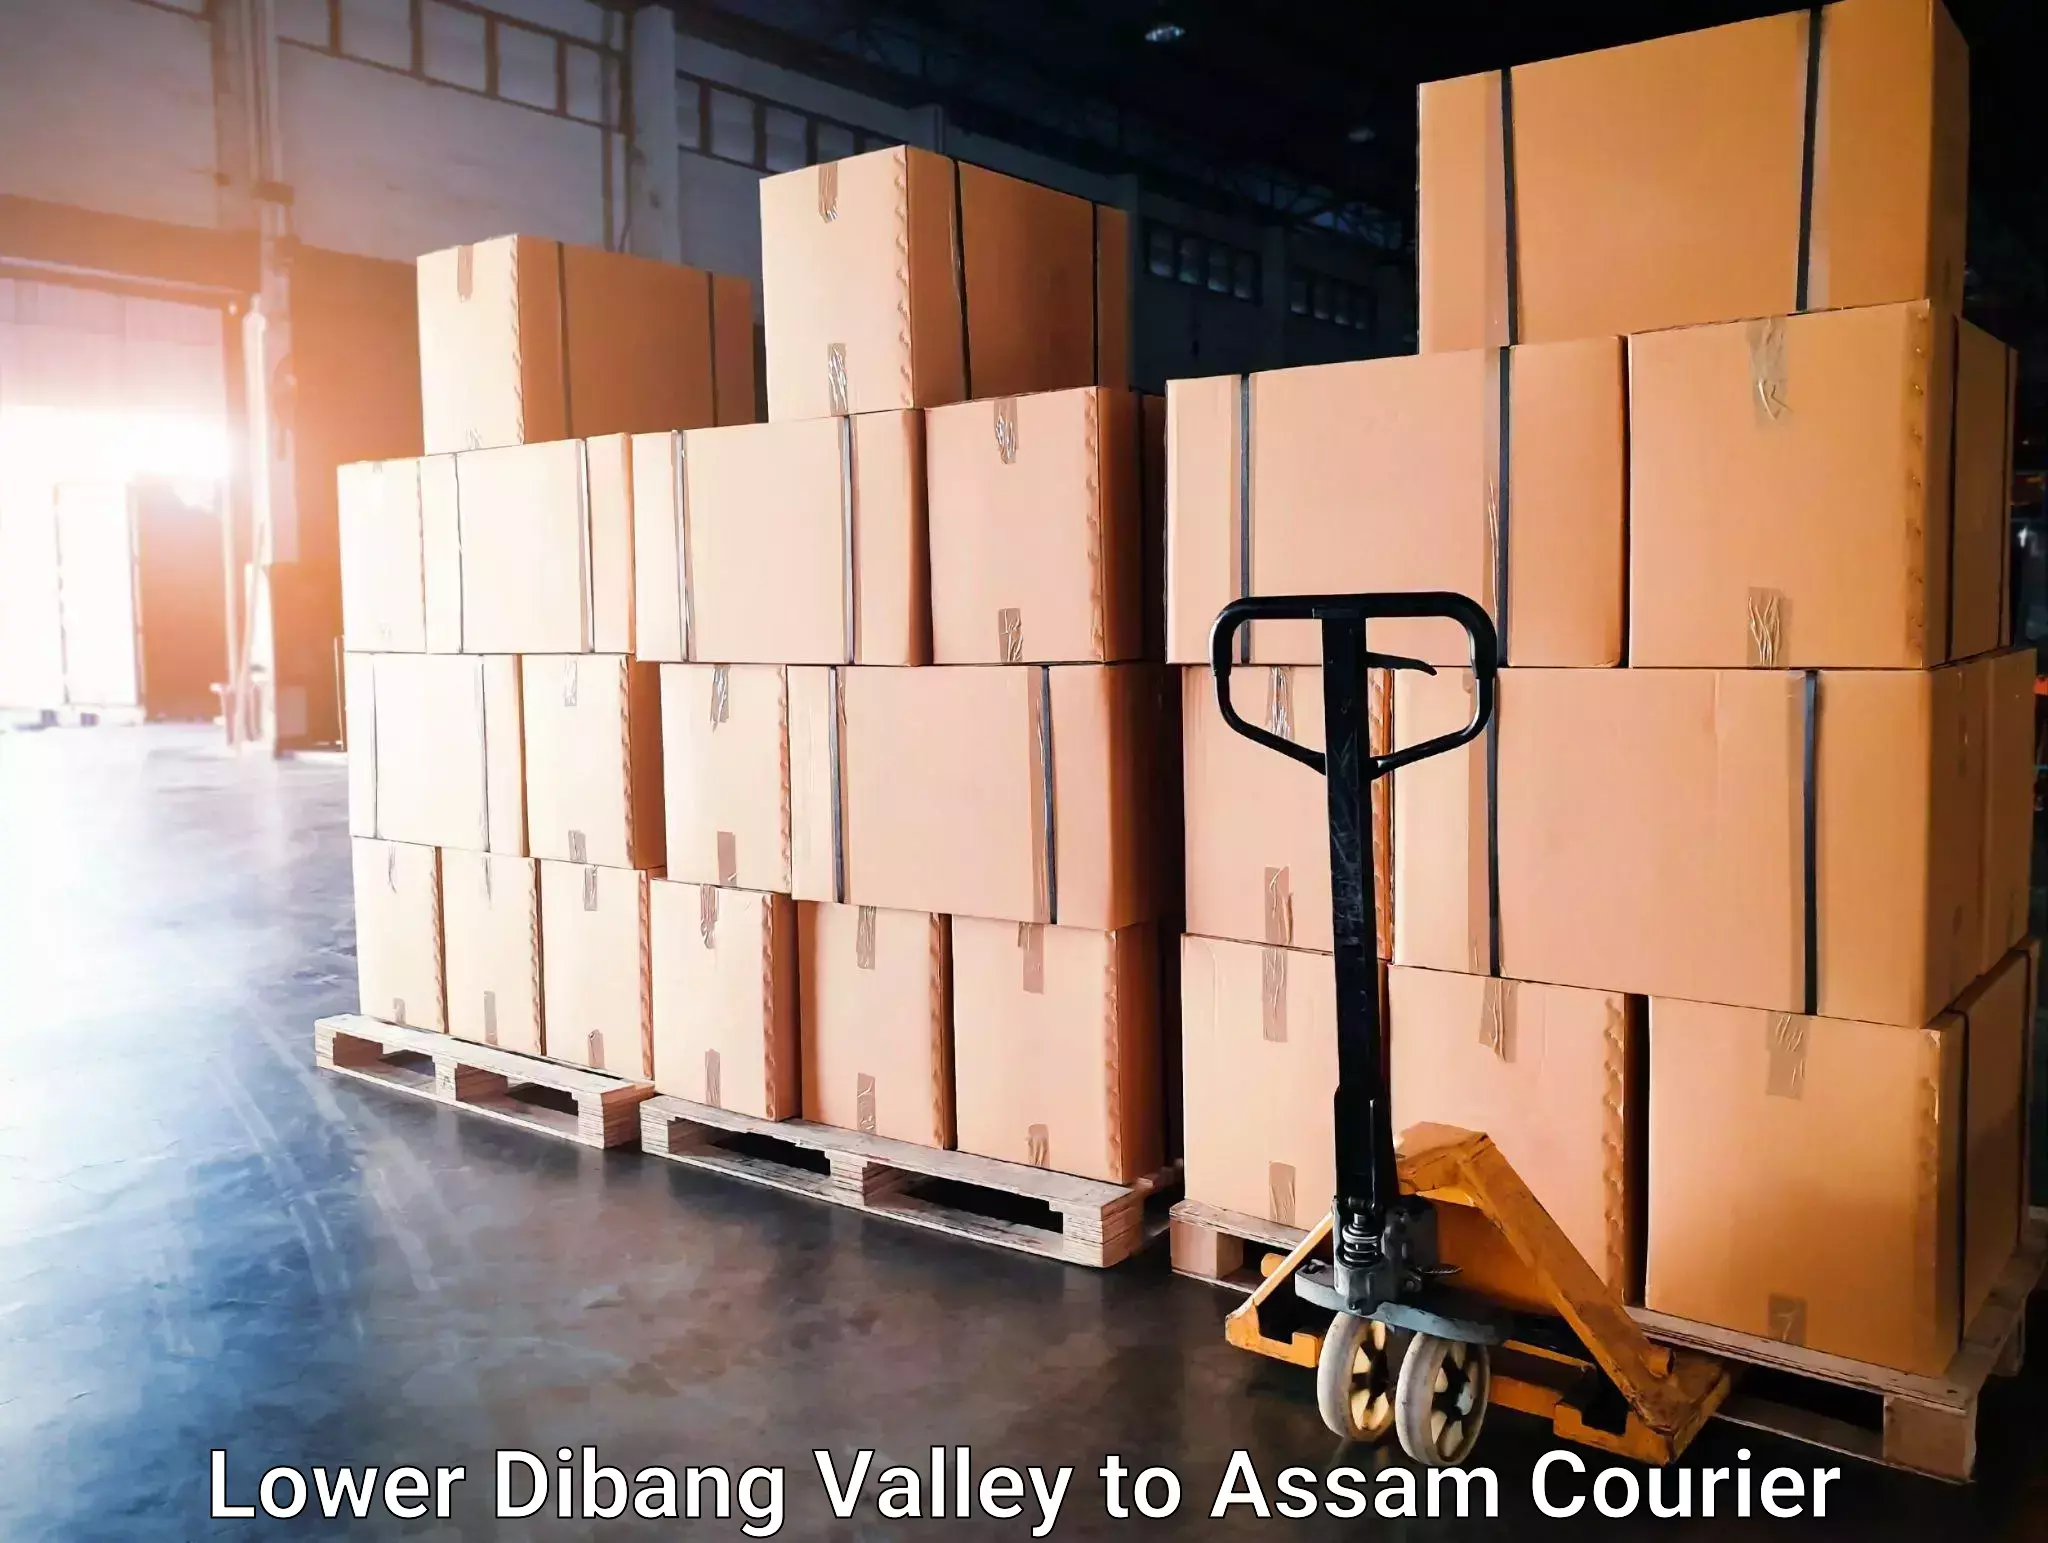 Courier service comparison Lower Dibang Valley to Sonari Charaideo